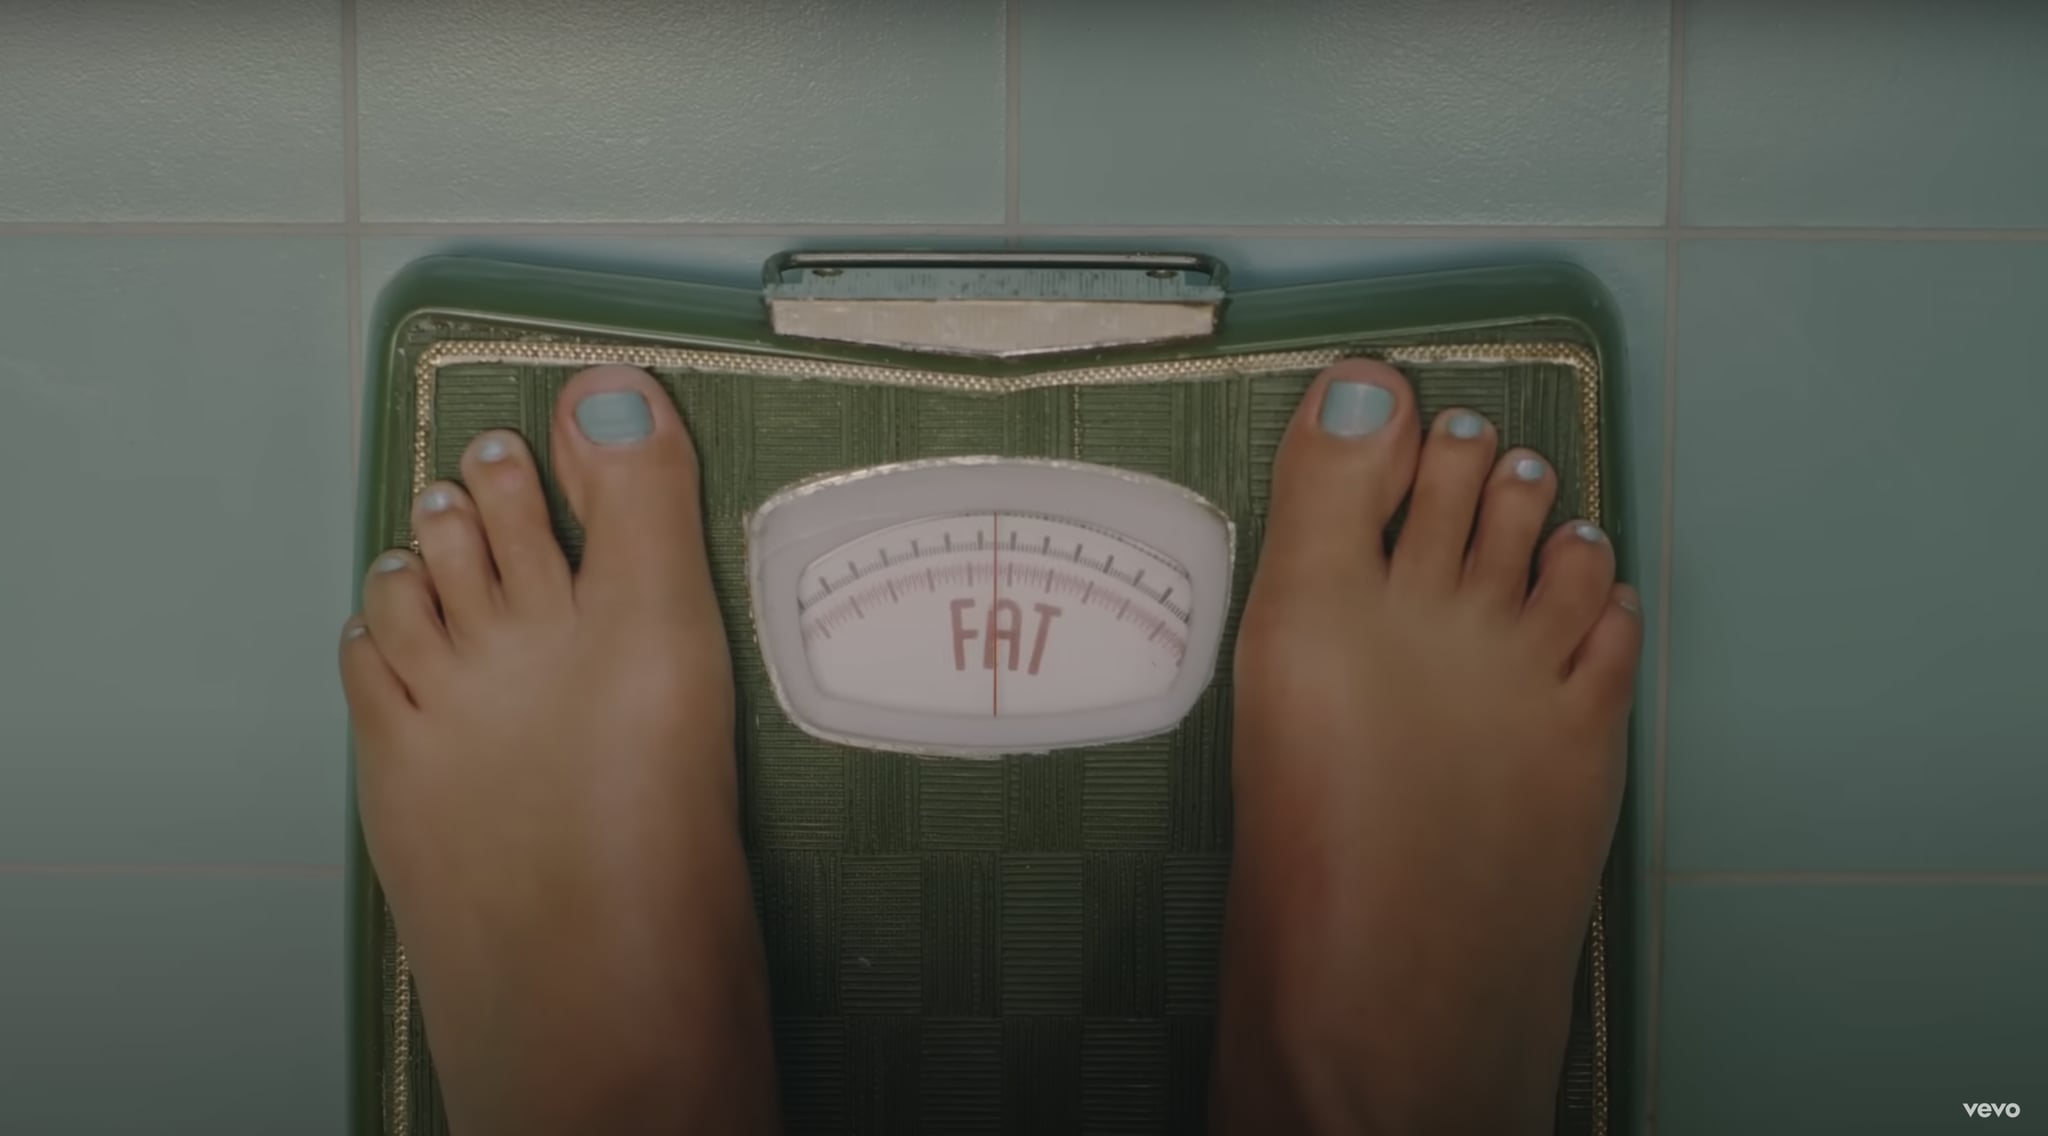 Taylor Swift Edits “Anti-Hero” Music Video For Potentially Fatphobic Content